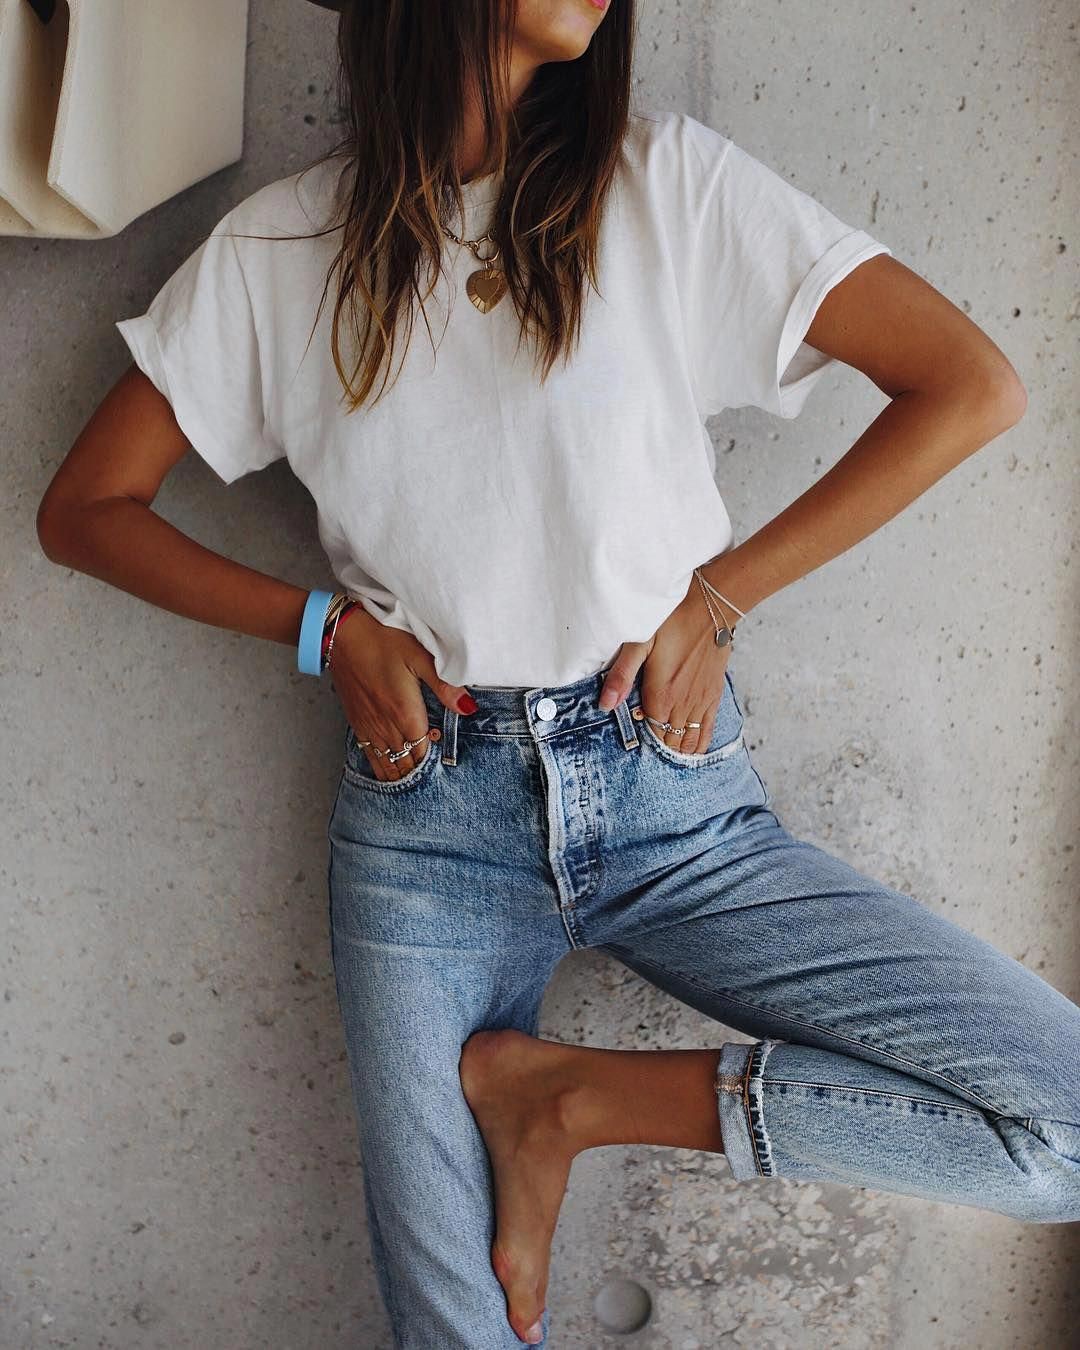 Latest Outfits With Mom Jeans For Teen Girls - Casual Fashion: Casual Outfits,  Denim Outfits,  Jeans Outfit Ideas,  Trendy Jeans Outfit  